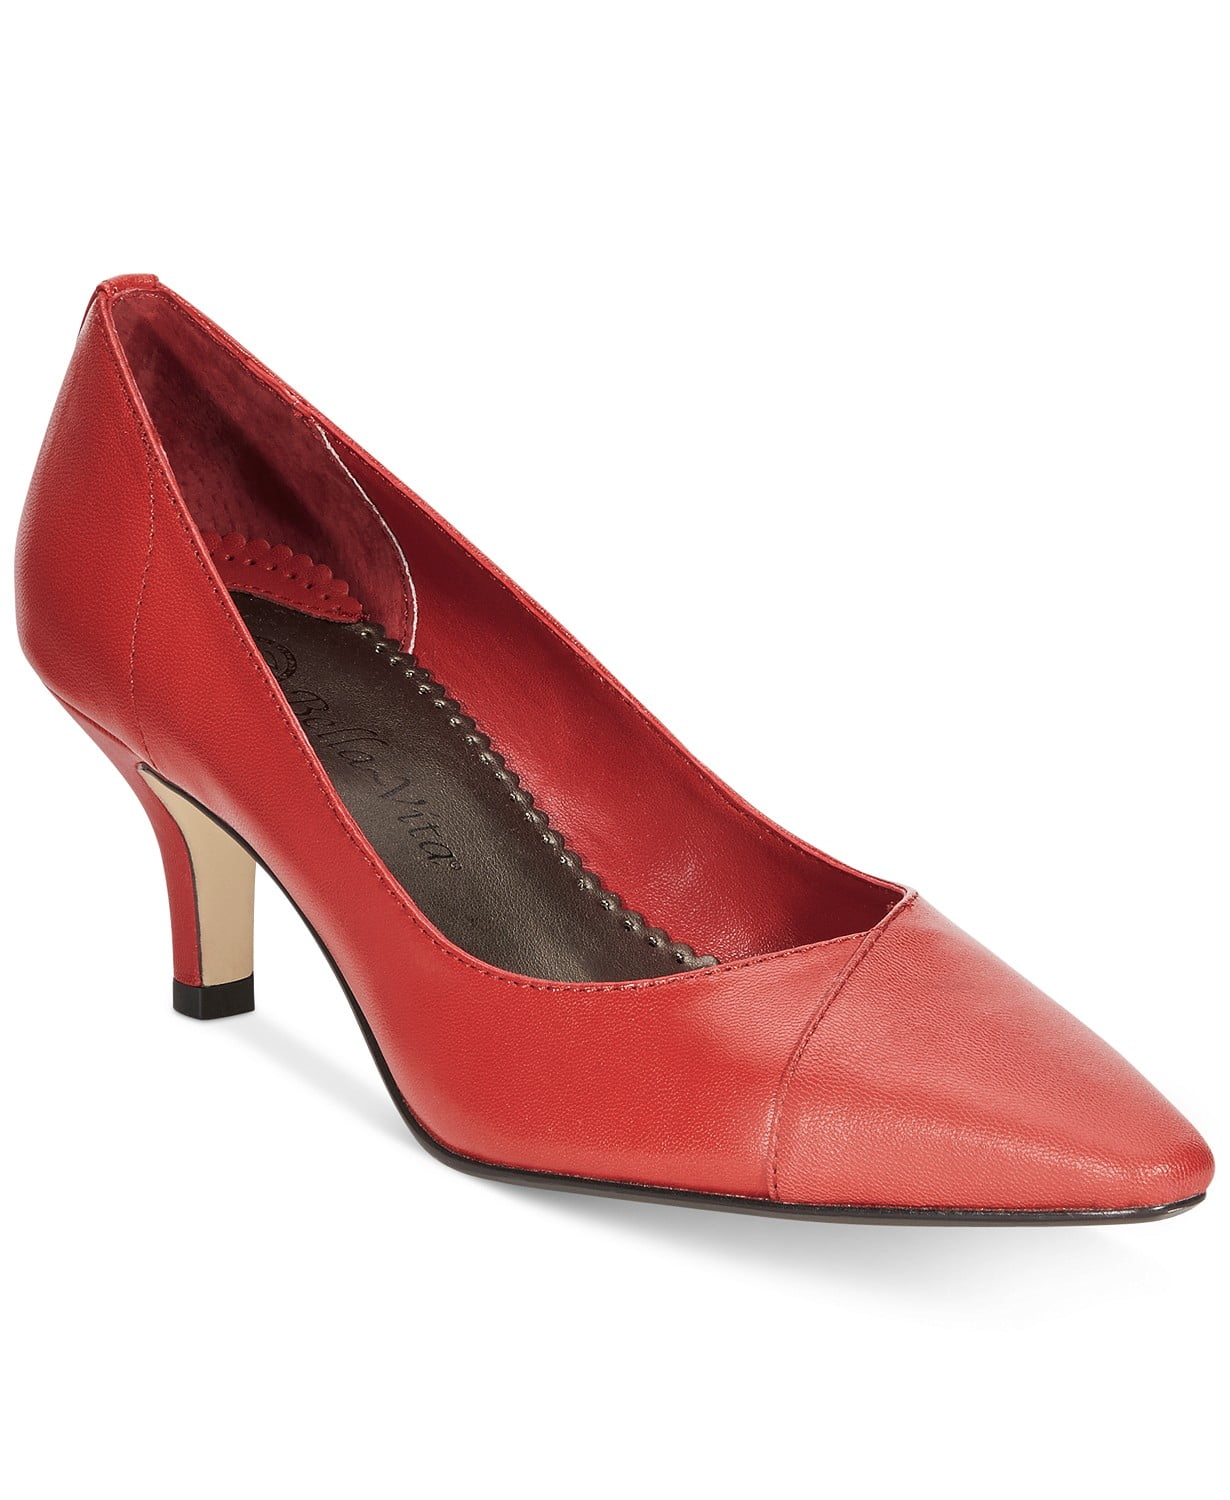 www.couturepoint.com-bella-vita-women-red-leather-wow-pumps